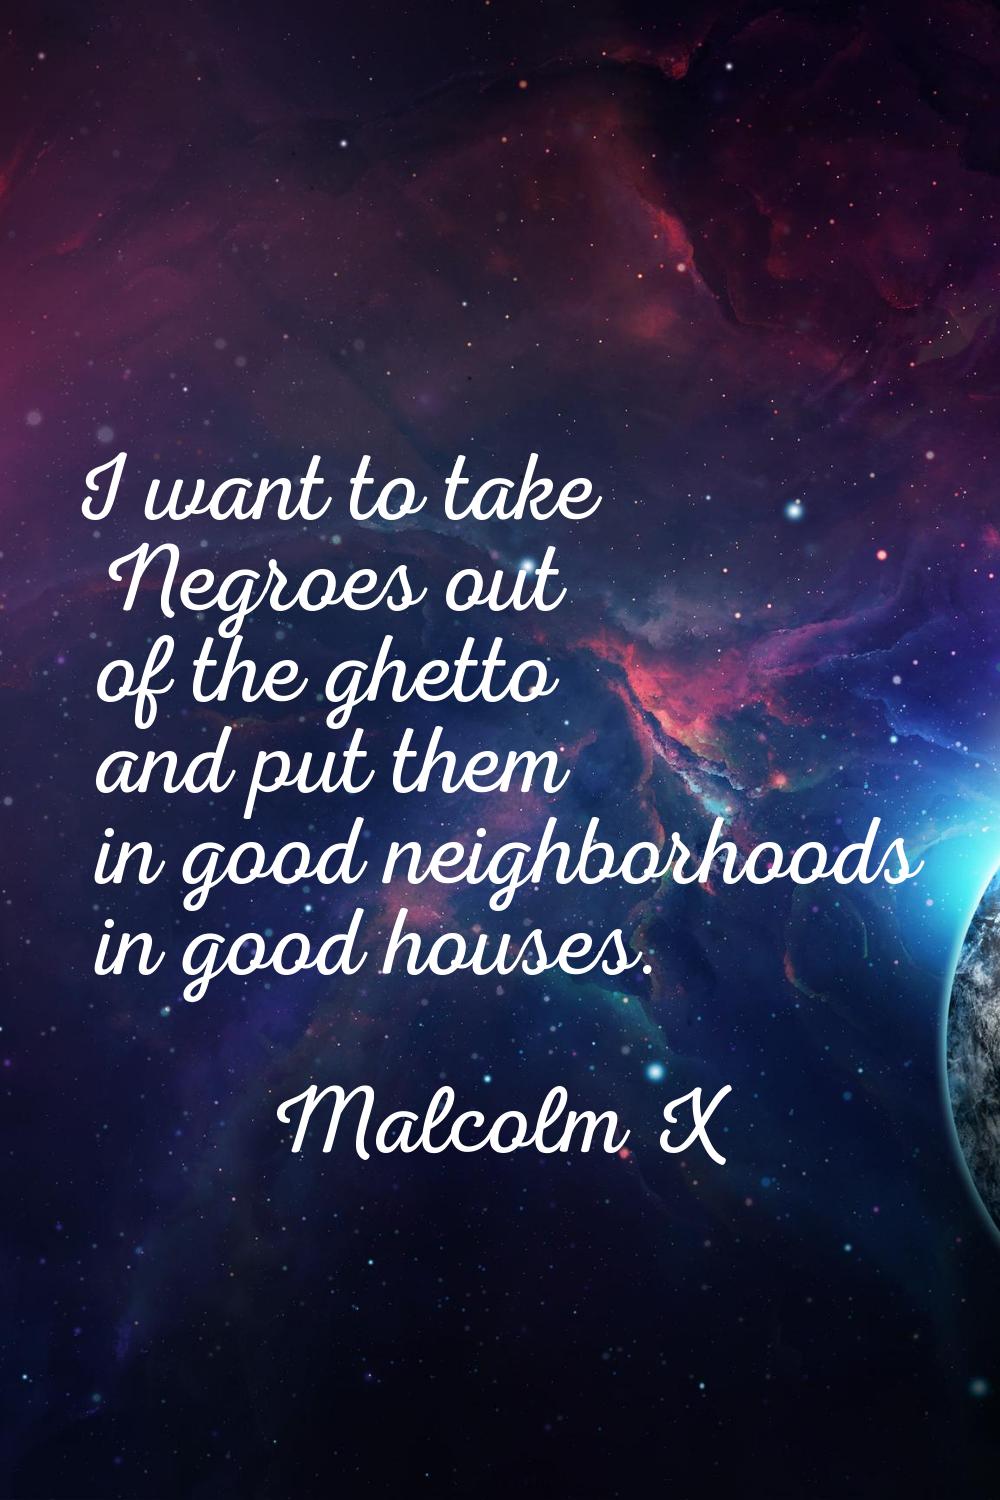 I want to take Negroes out of the ghetto and put them in good neighborhoods in good houses.